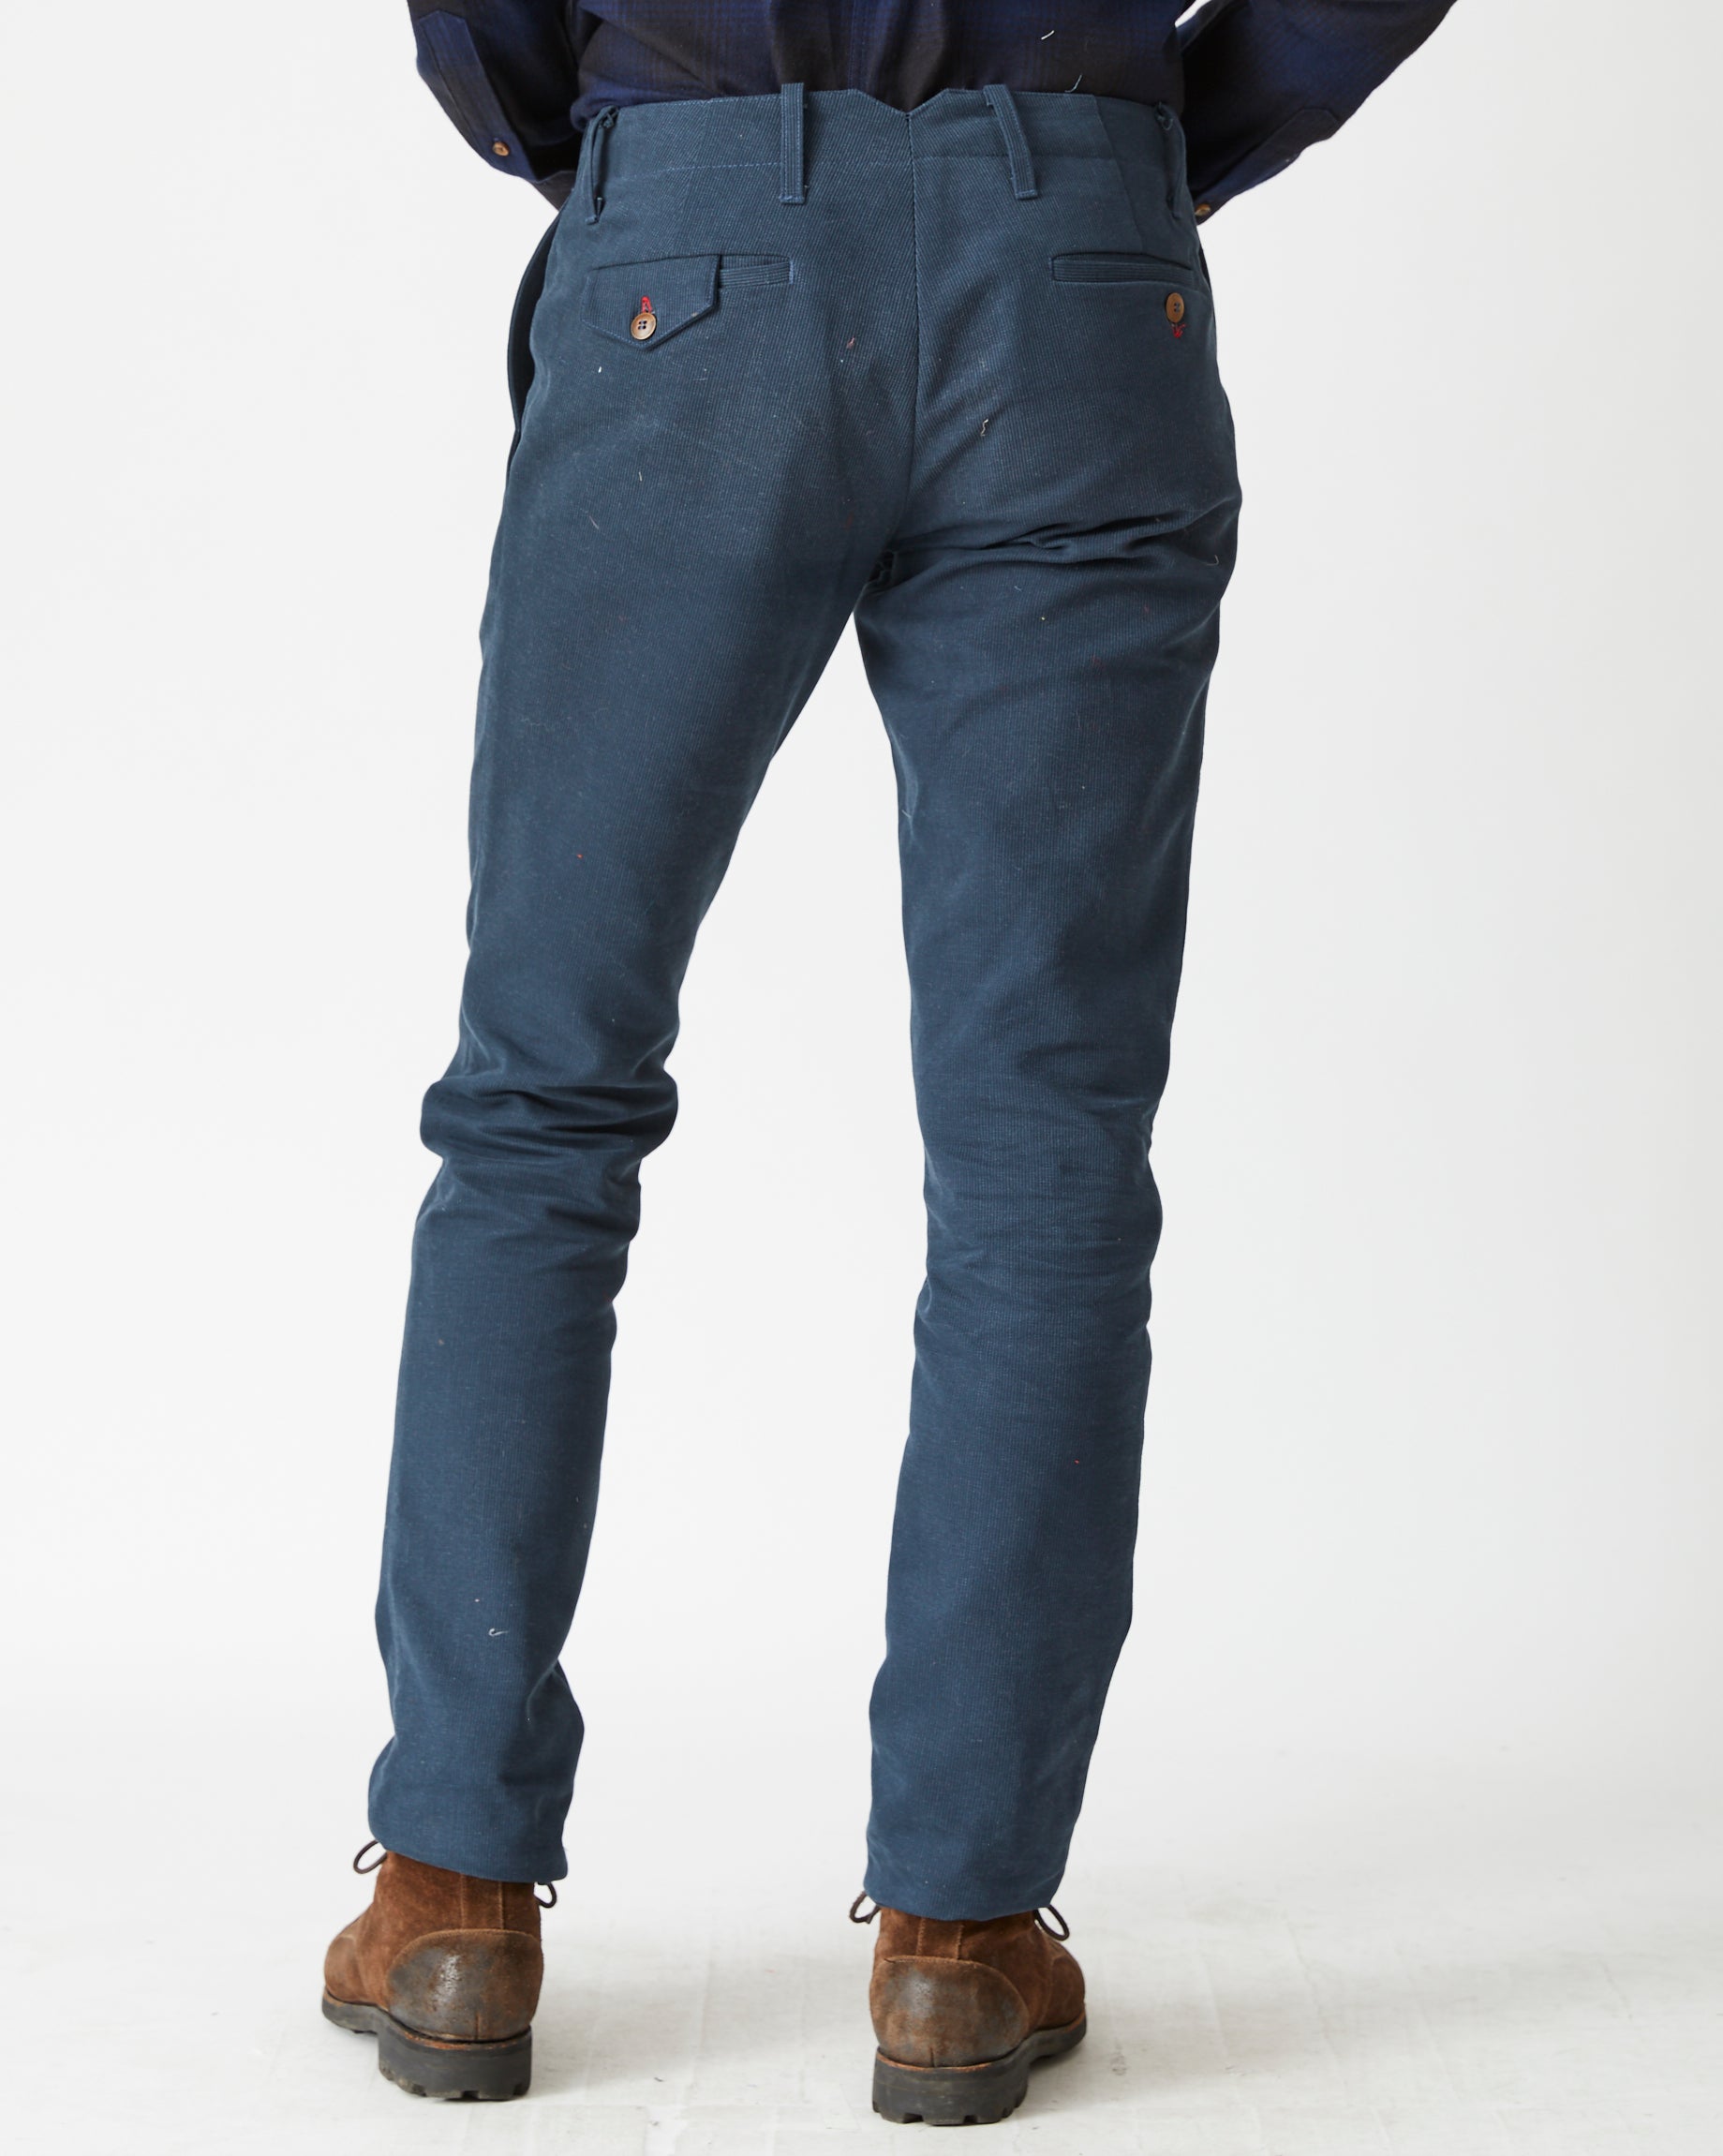 Signature Trouser | Navy Bedford Cord